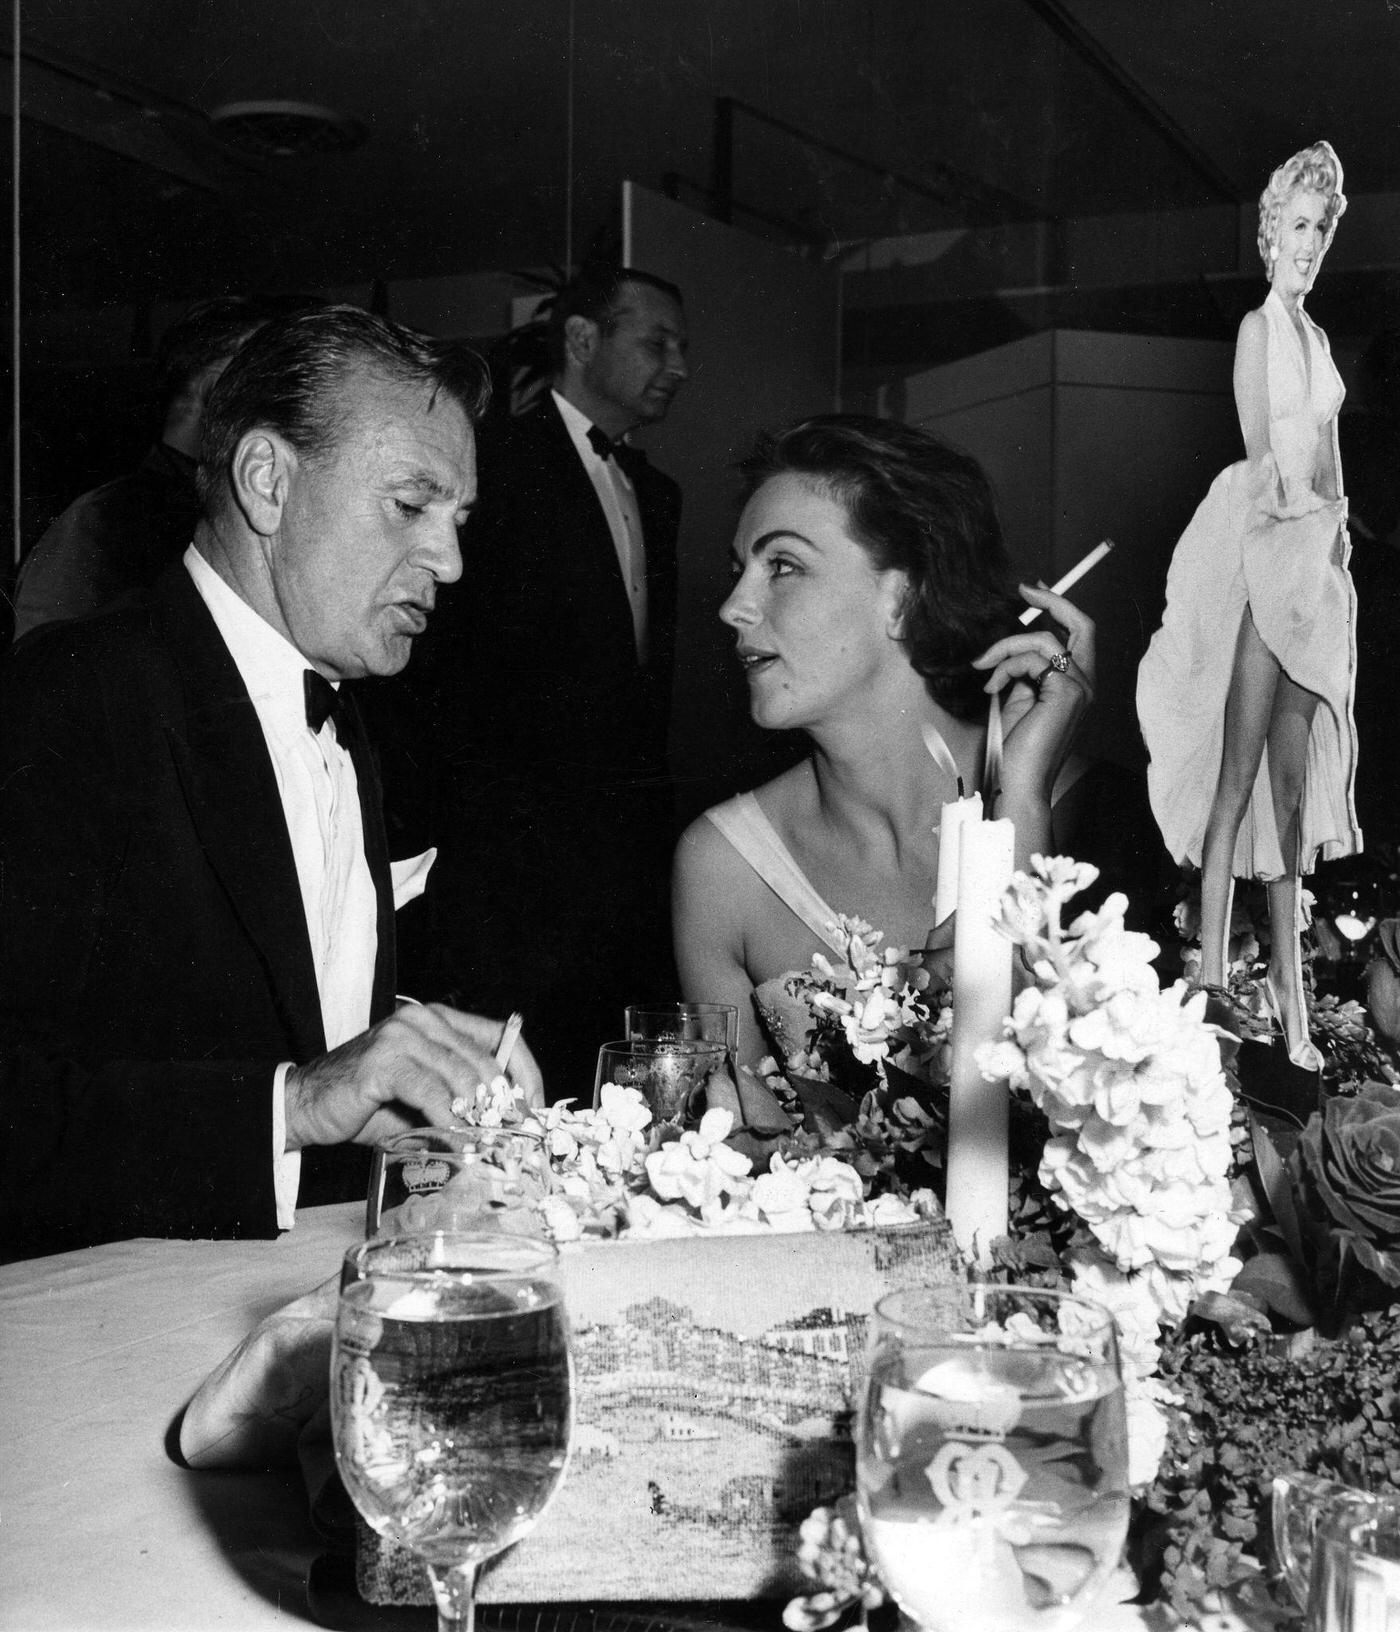 Gary Cooper with Hjordis Tersmeden, wife of actor David Niven, at the wrap party for the filming of "The Seven Year Itch" at Romanoff's Restaurant in 1954